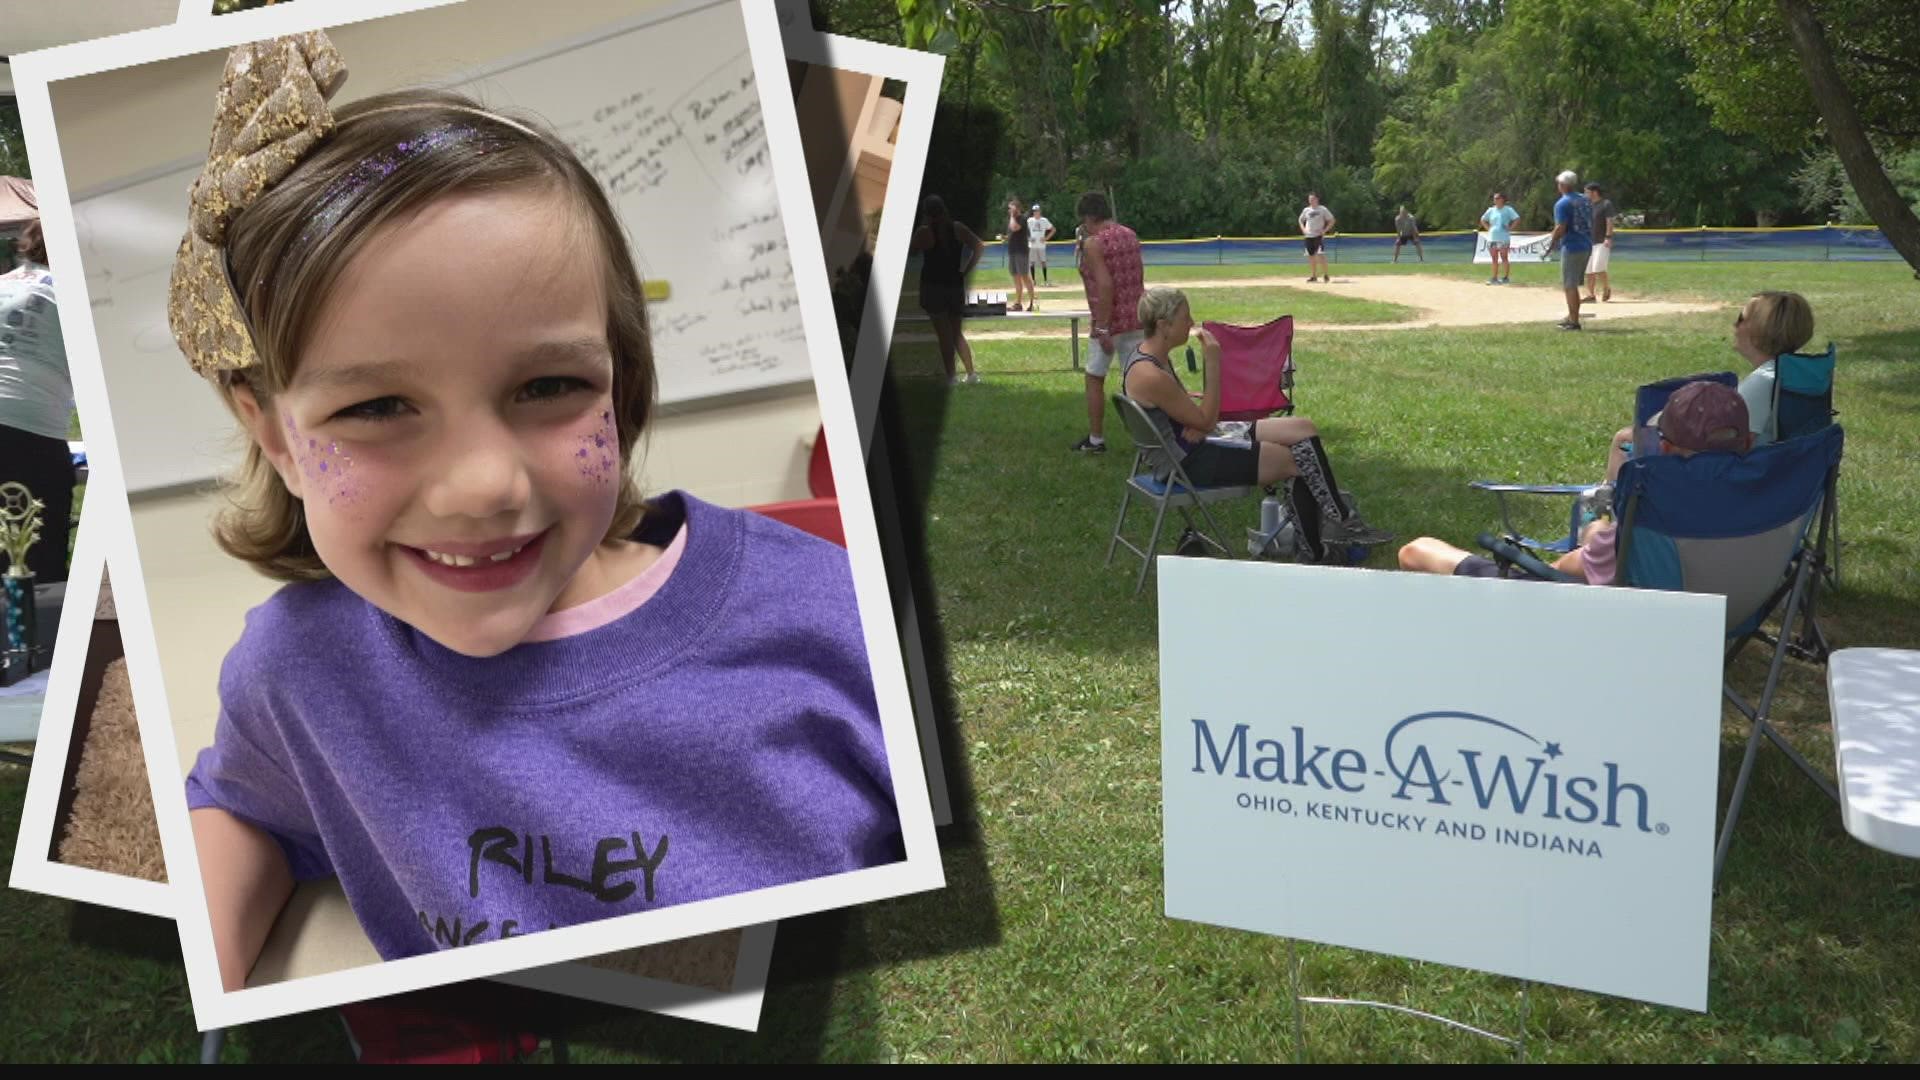 Grace is a 6-year-old girl who's undergoing treatment for leukemia.